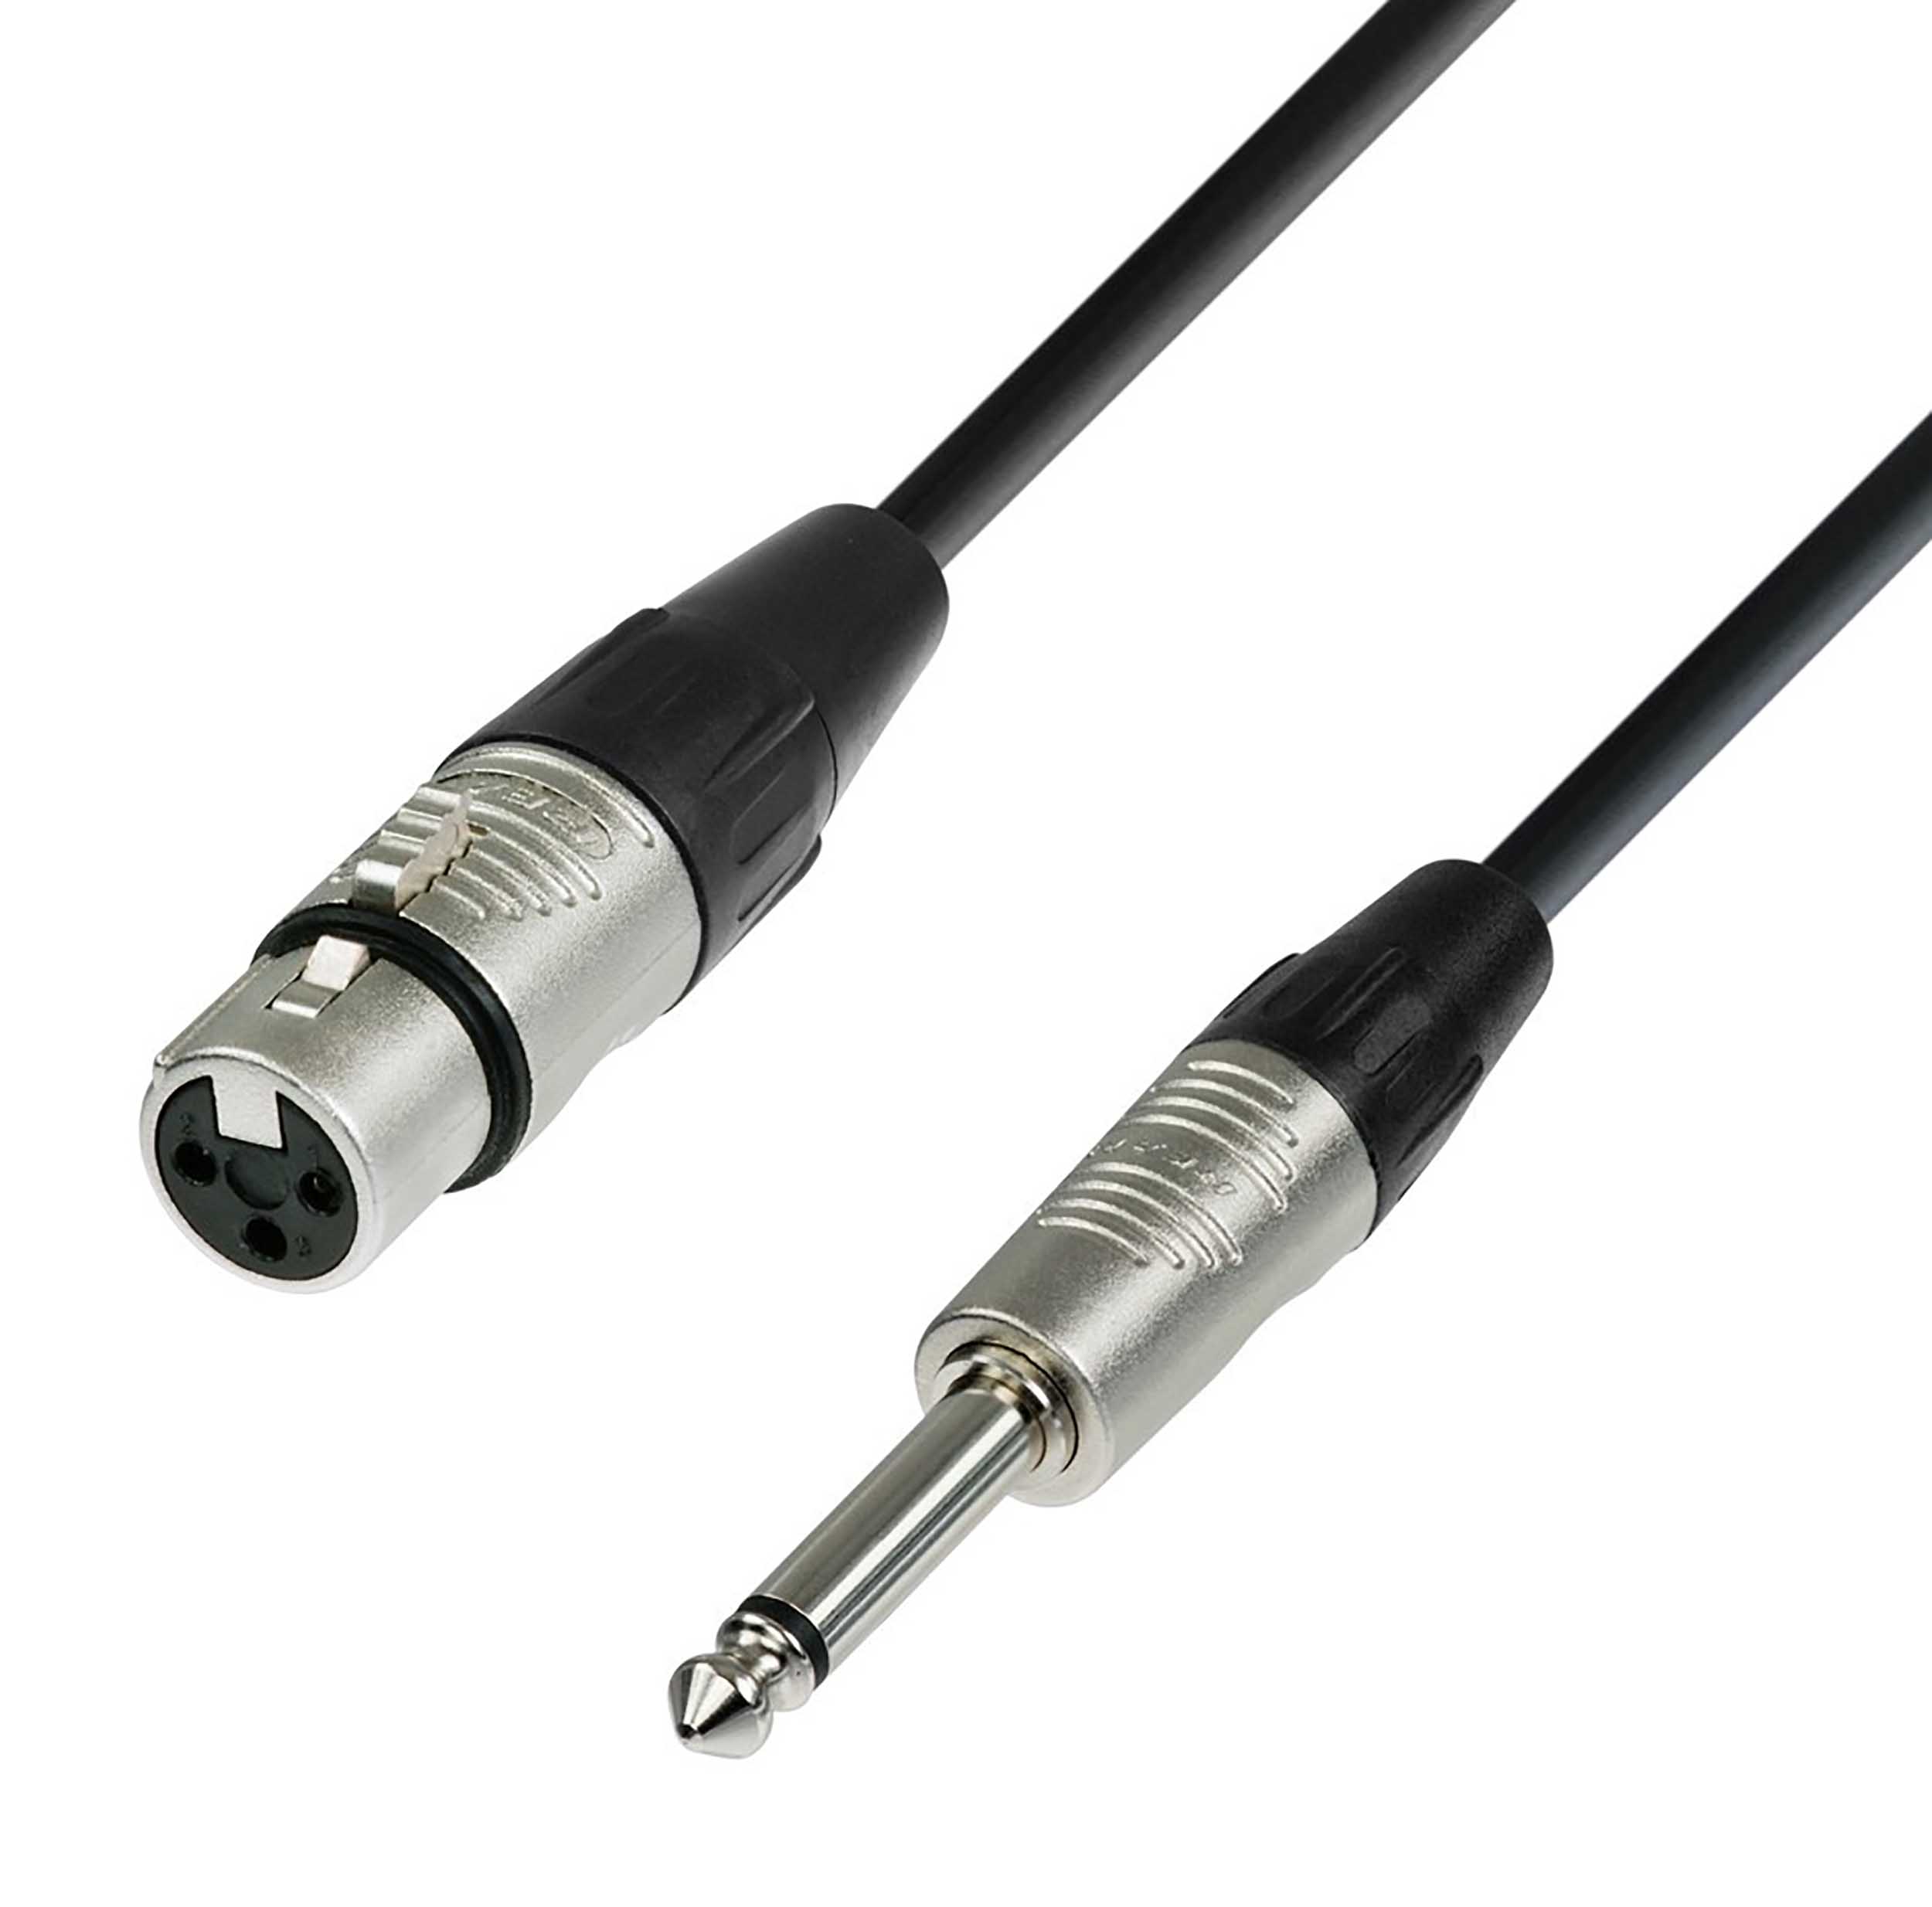 Adam Hall Cables 4 STAR MFP 0150 Microphone Cable Rean XLR Female to Jack TS - 1.5 M by Adam Hall